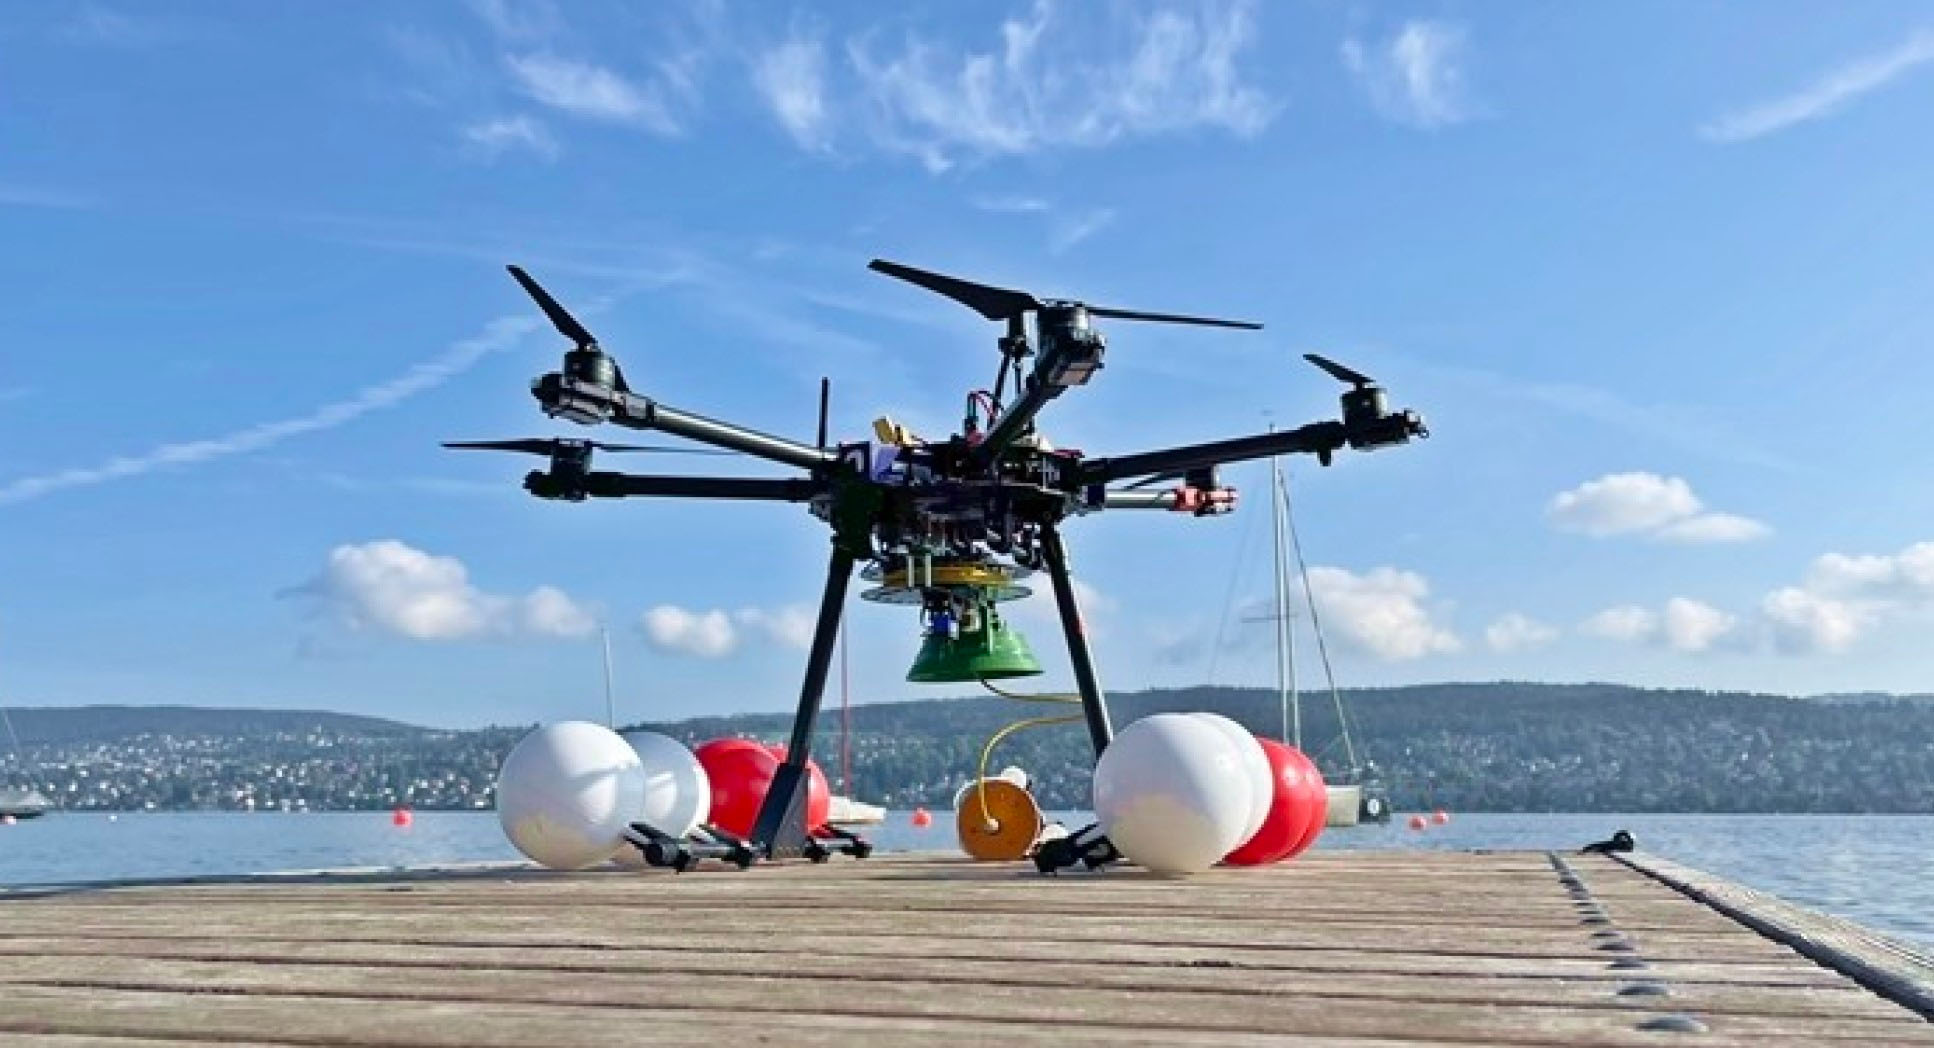 MEDUSA and its tethered pod poised for take-off on Lake Zurich